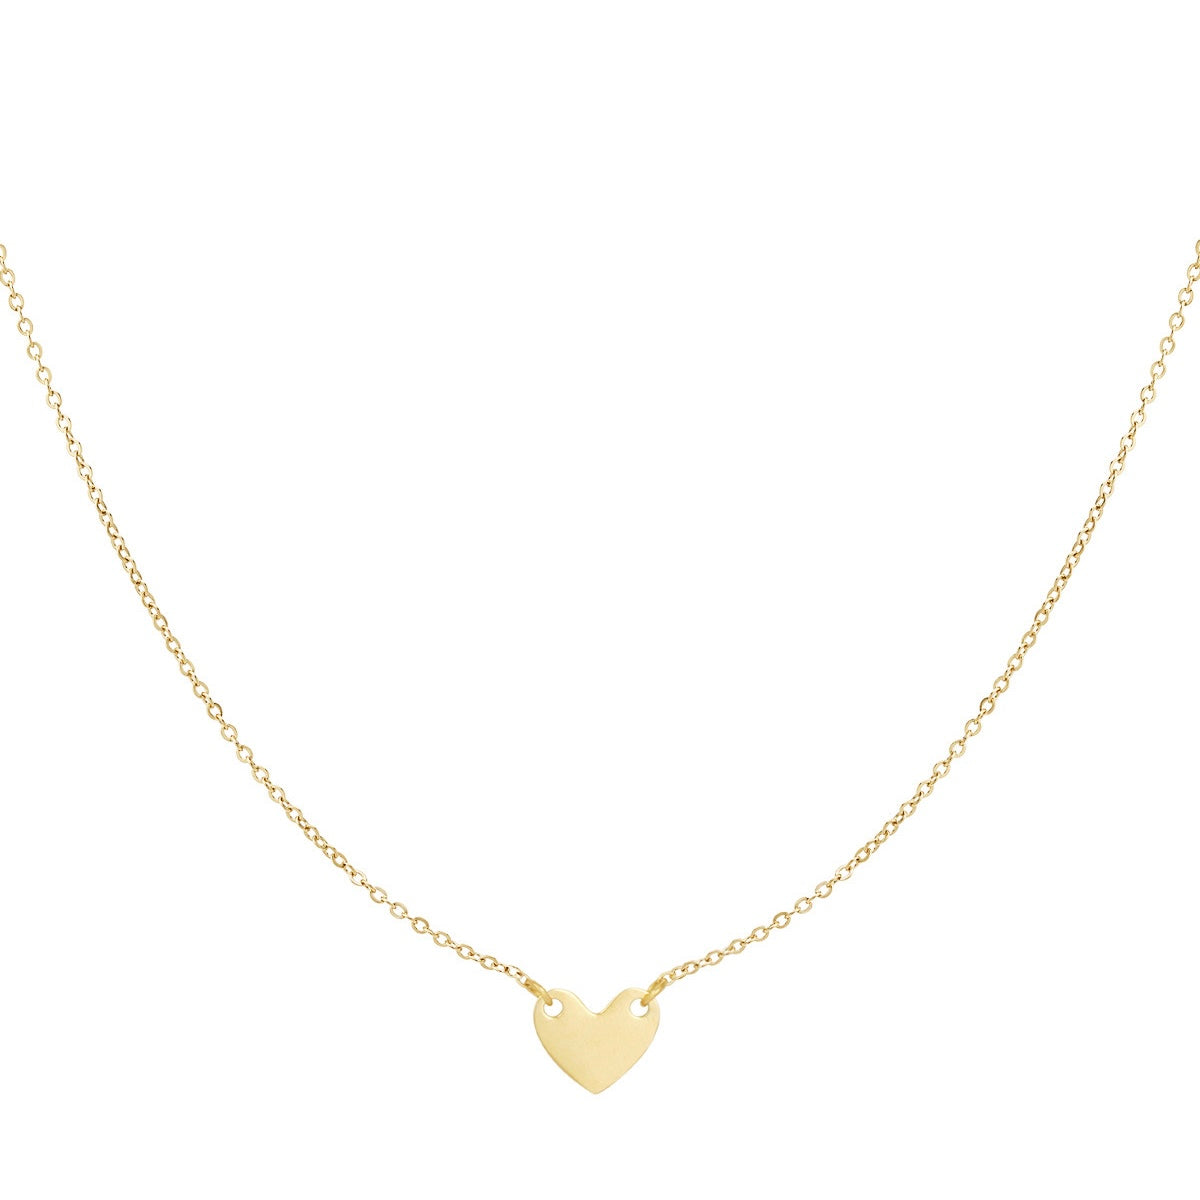 Enduring Affection Necklace 2x - Gold